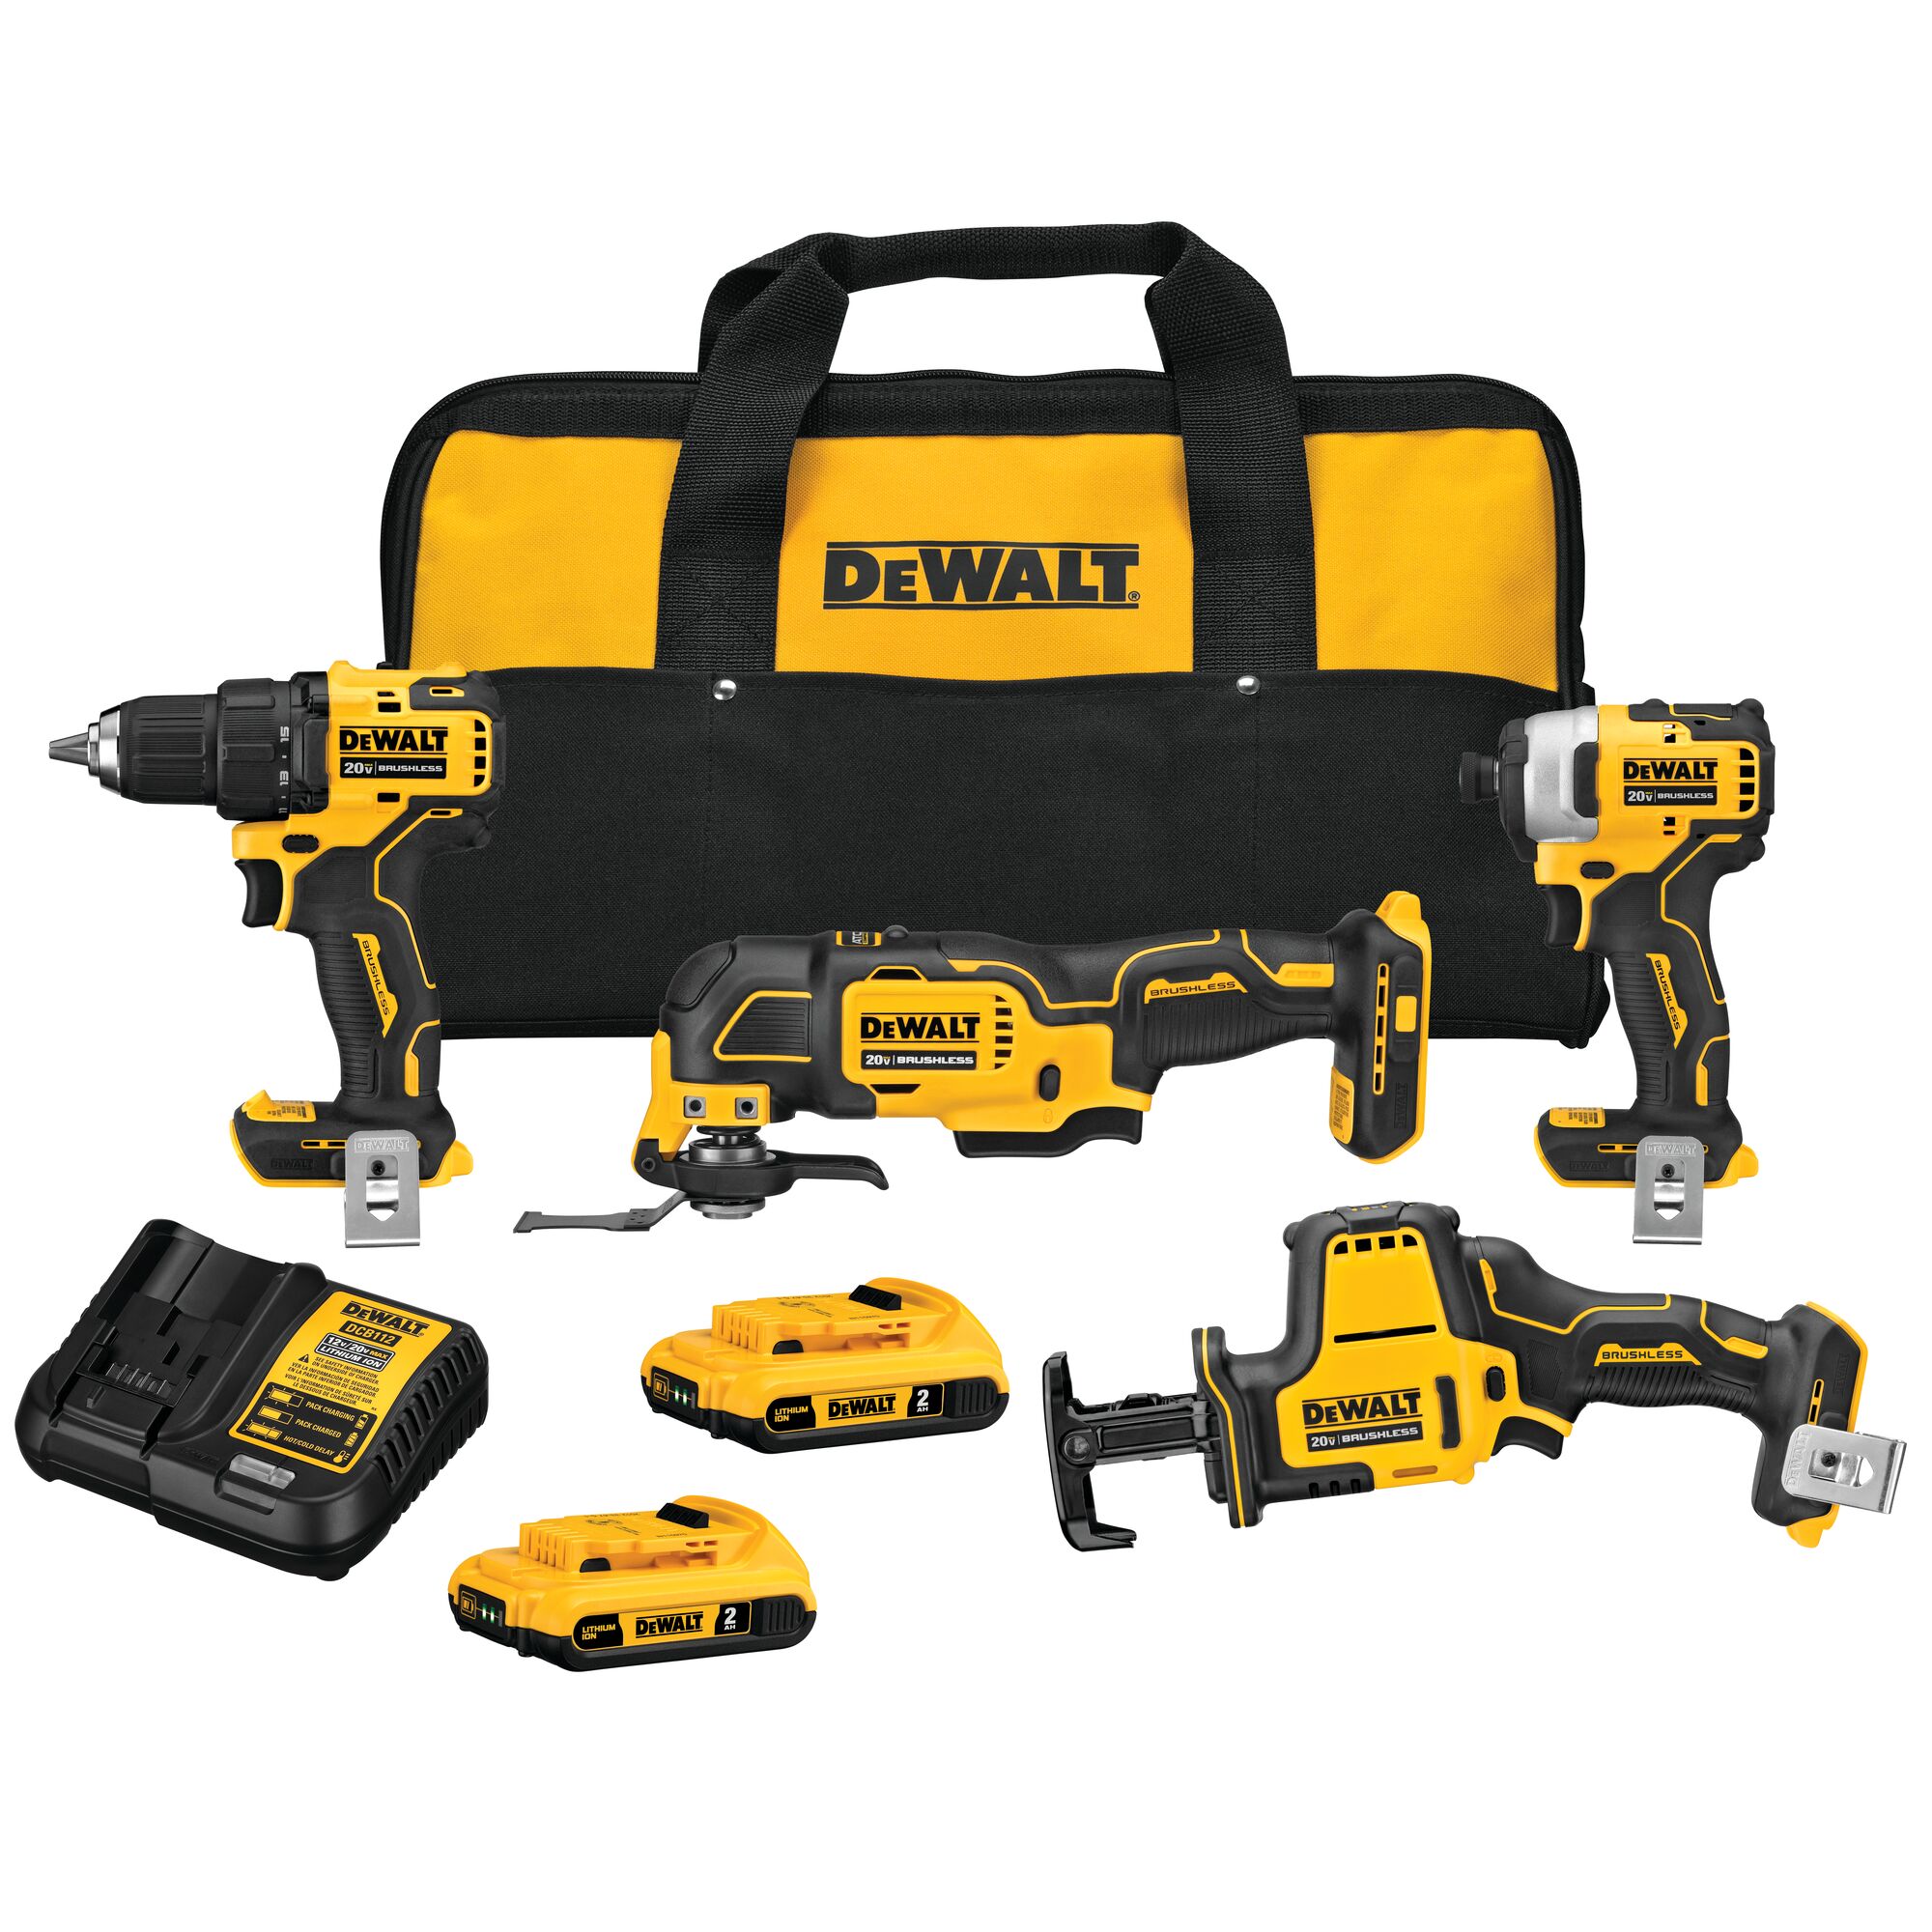 DEWALT expands ATOMIC COMPACT SERIES line with new hand tools